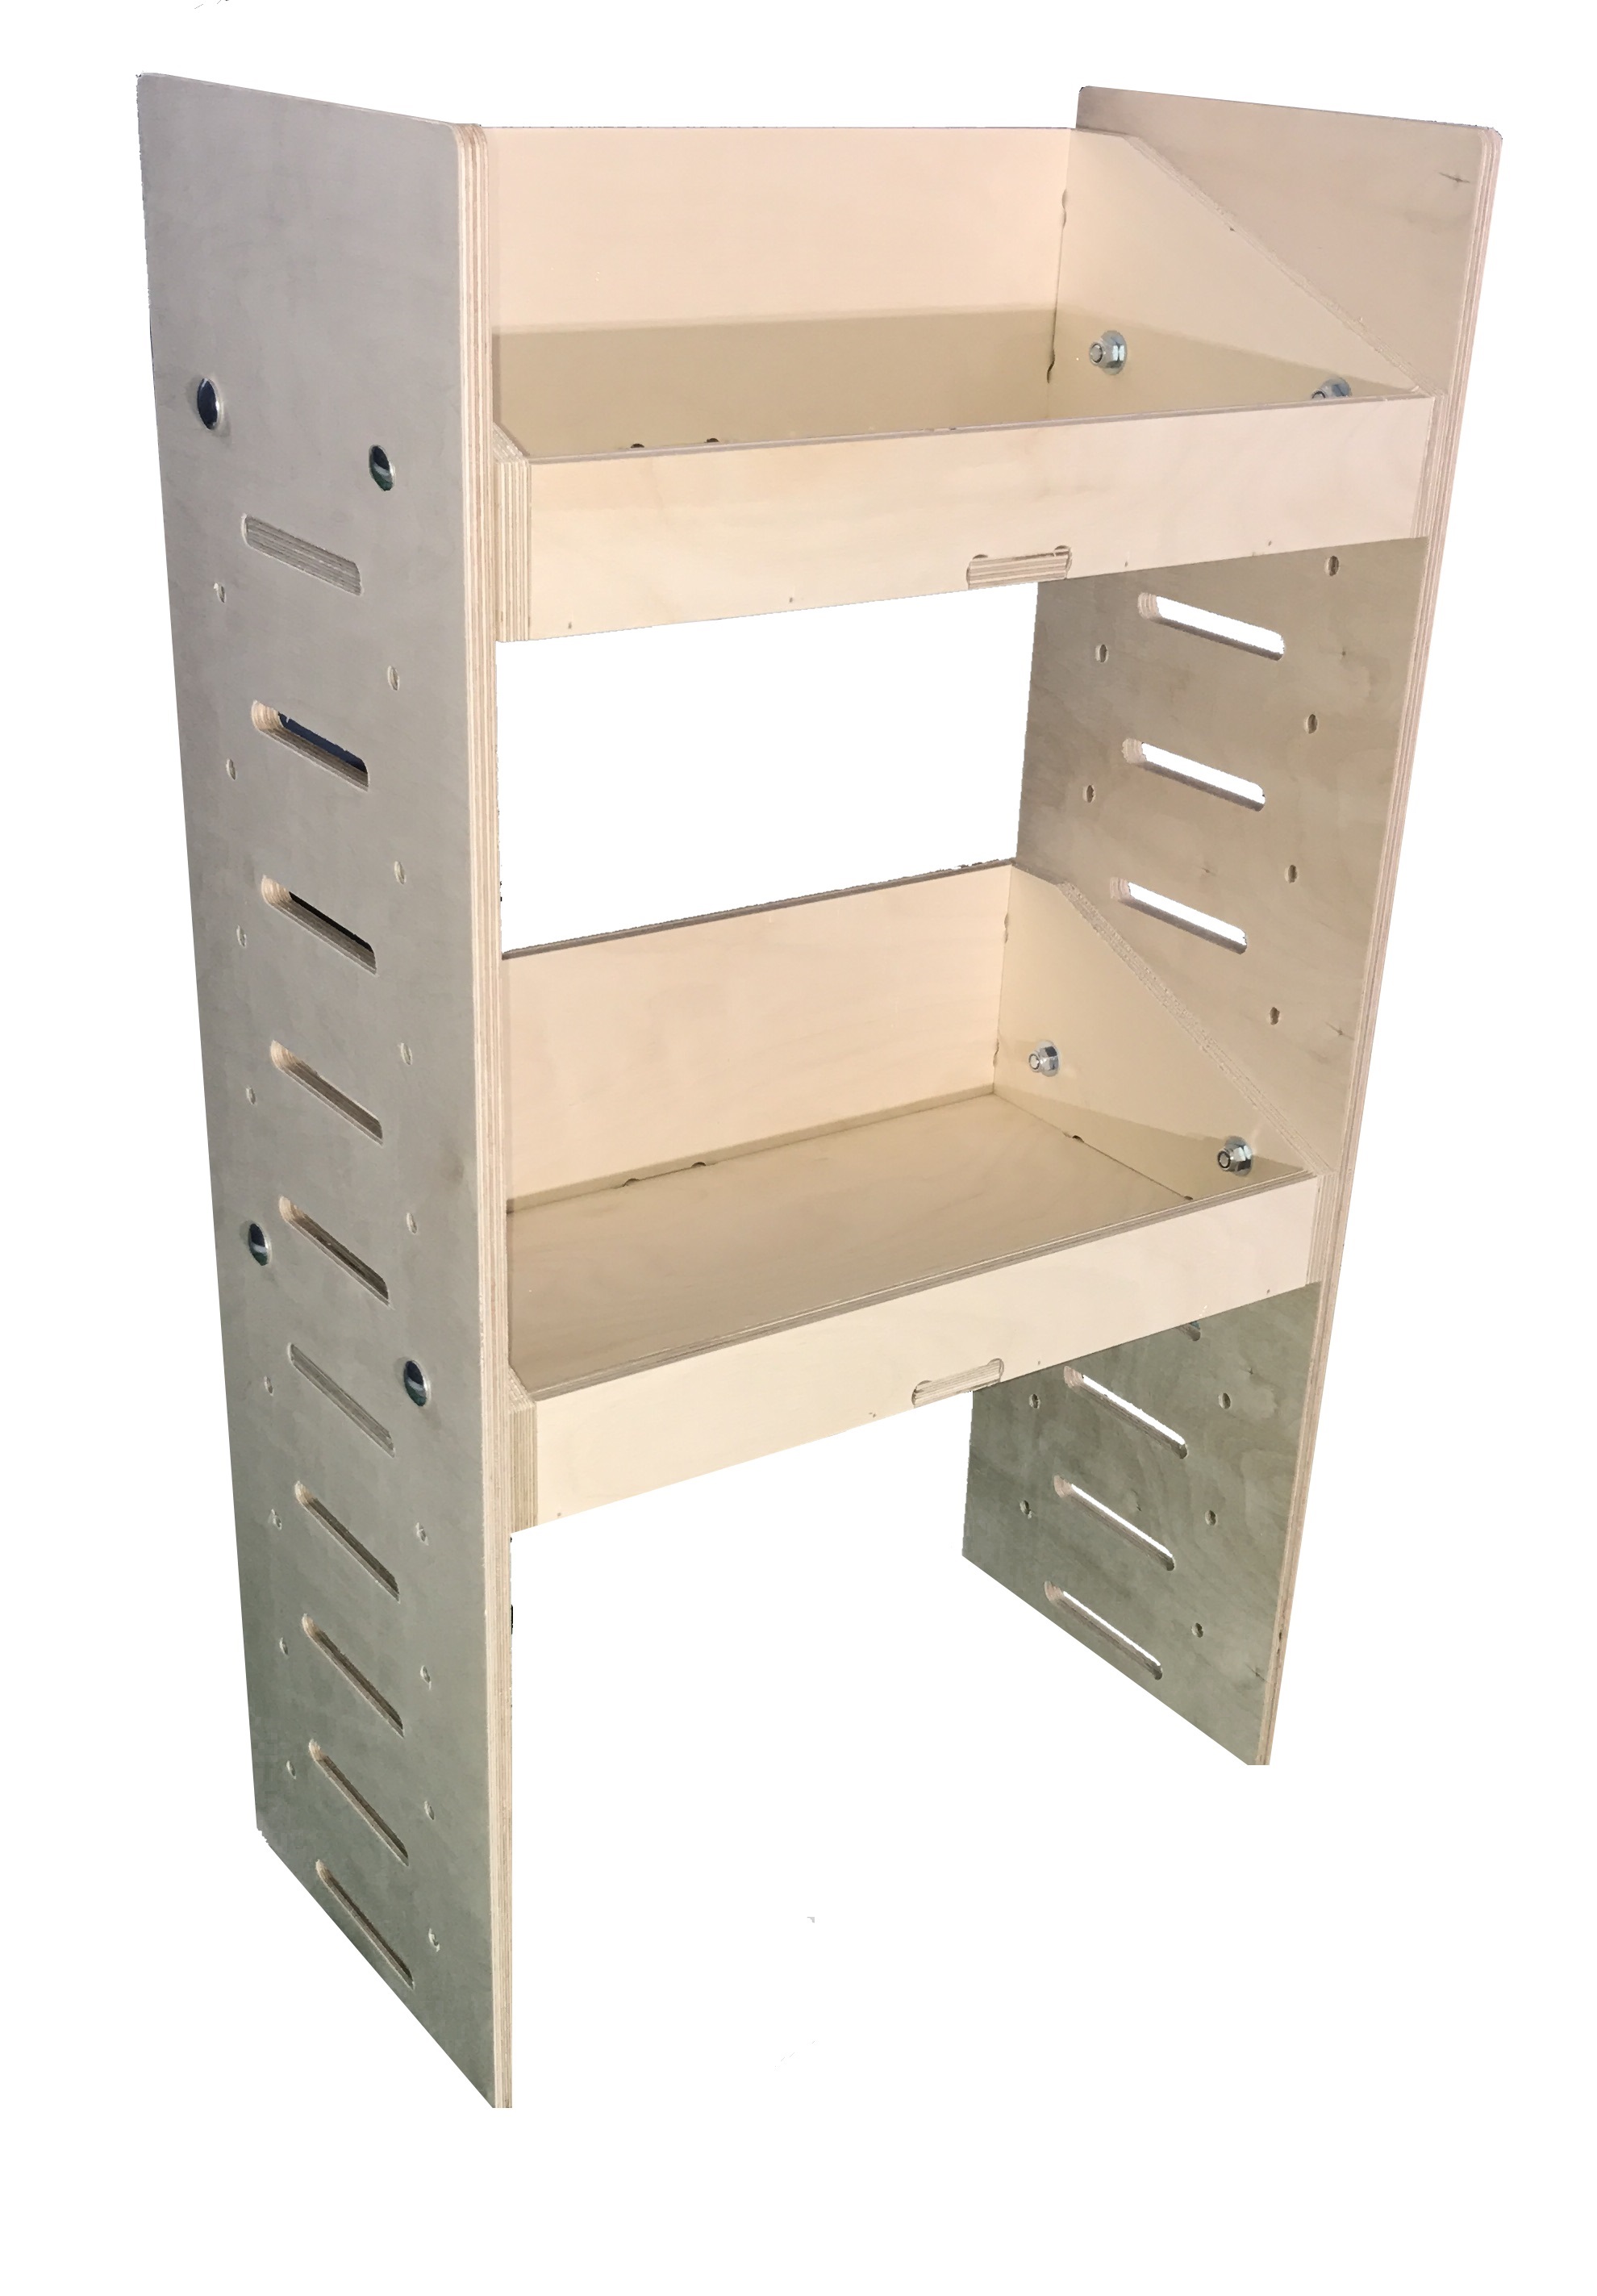 Van Plywood Shelving and Racking Storage System 862mm(H) x 500mm(W) x 269mm(D) - BVR8650262